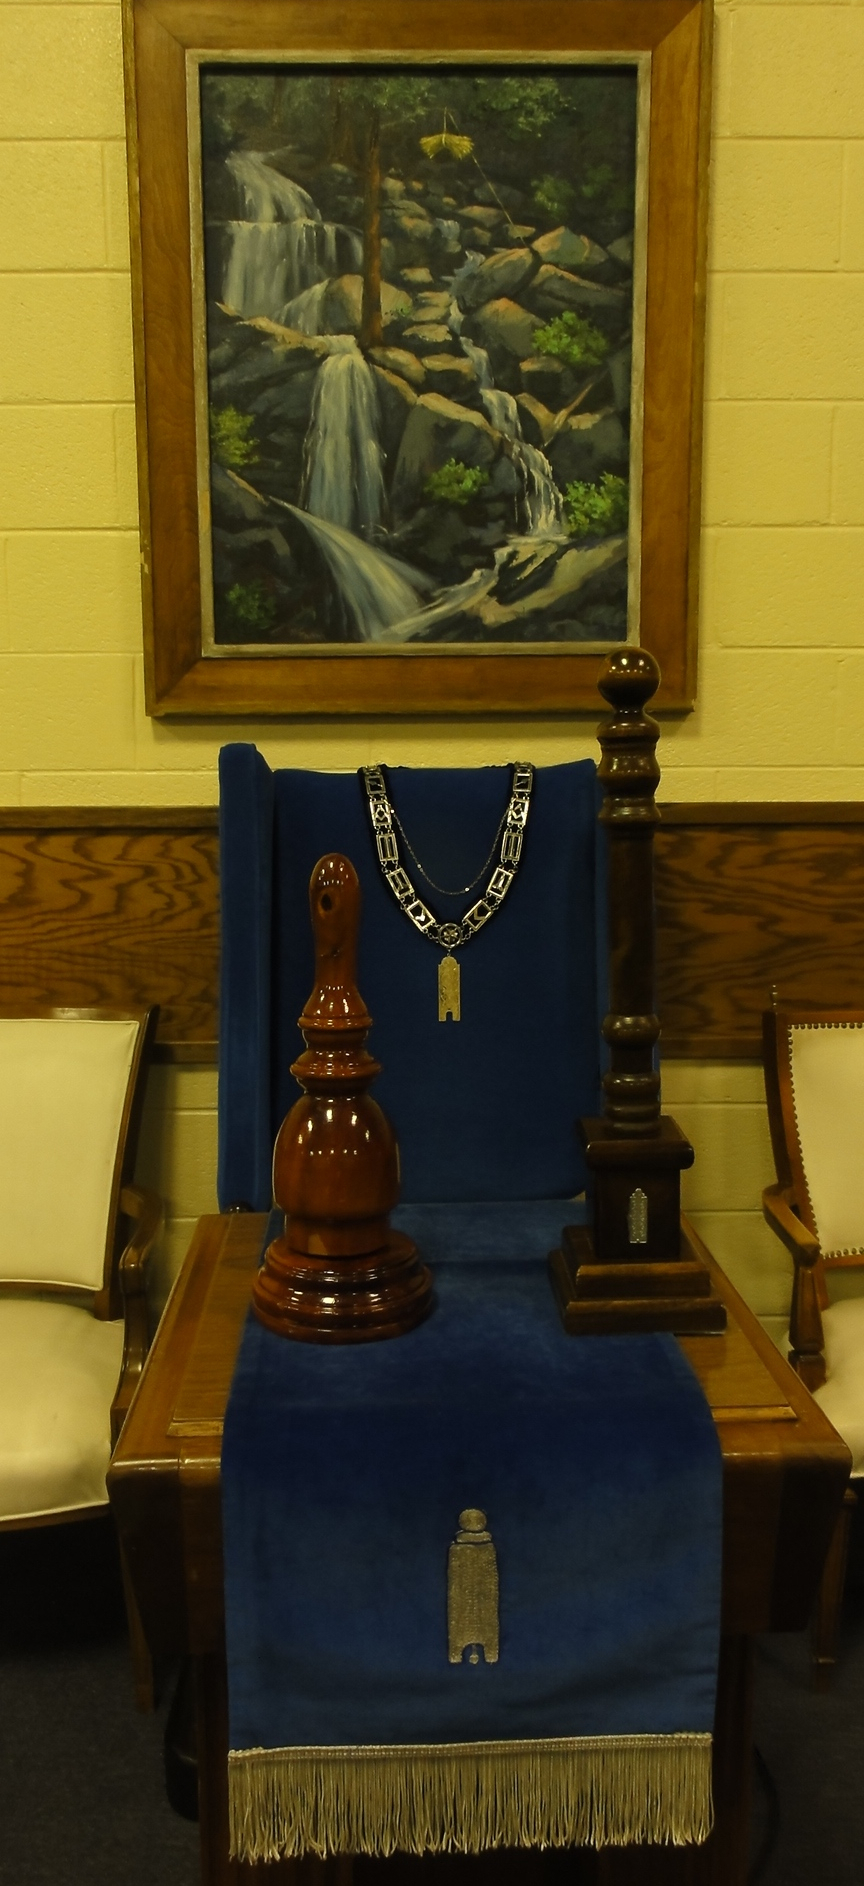 The Junior Warden's Station in the South, with jewel, apron, gavel, and pillar.